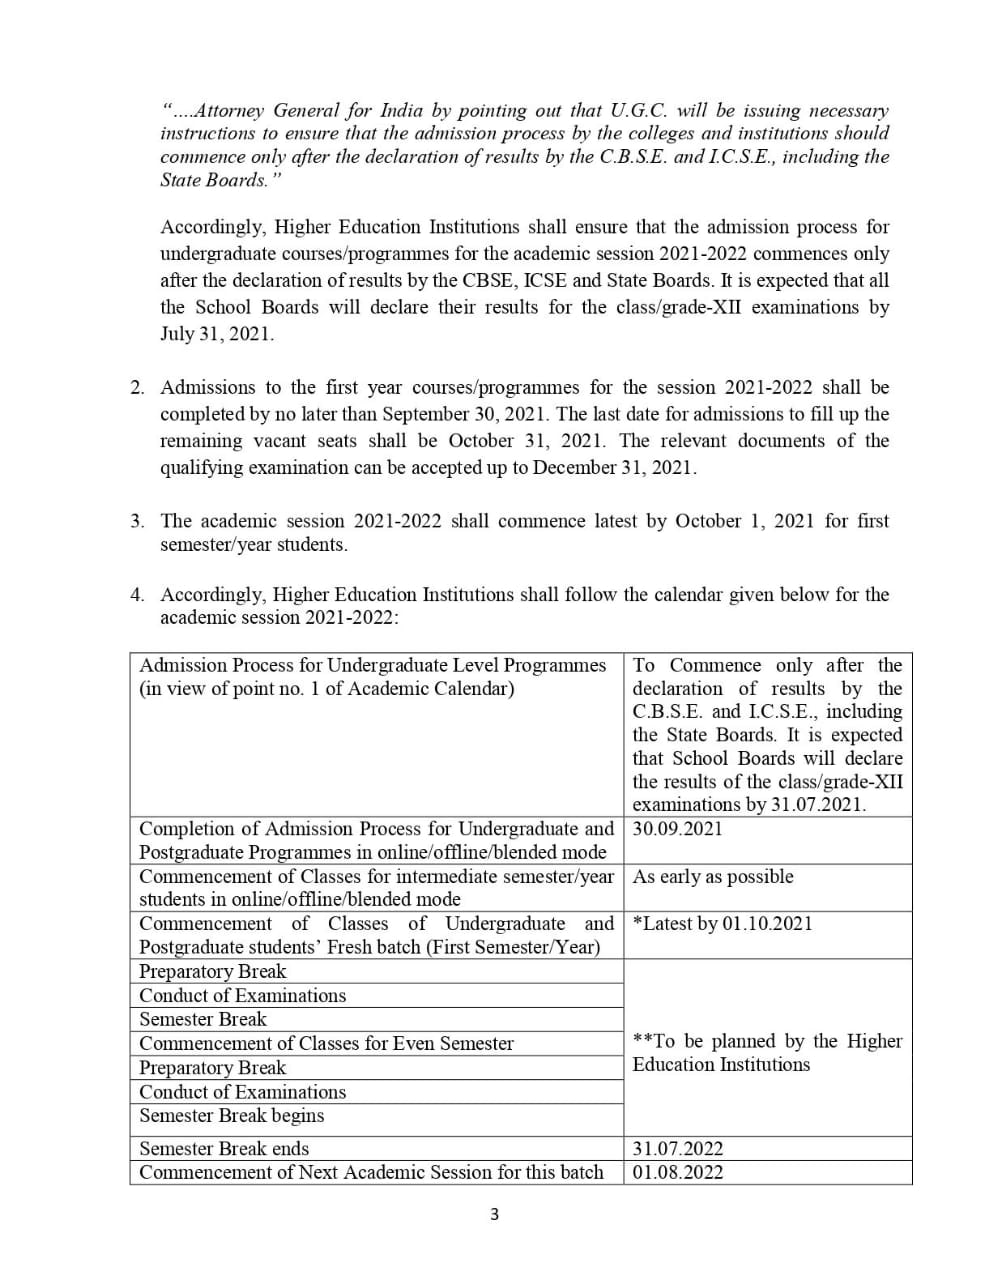 ugc guidelines for phd thesis submission 2021 pdf